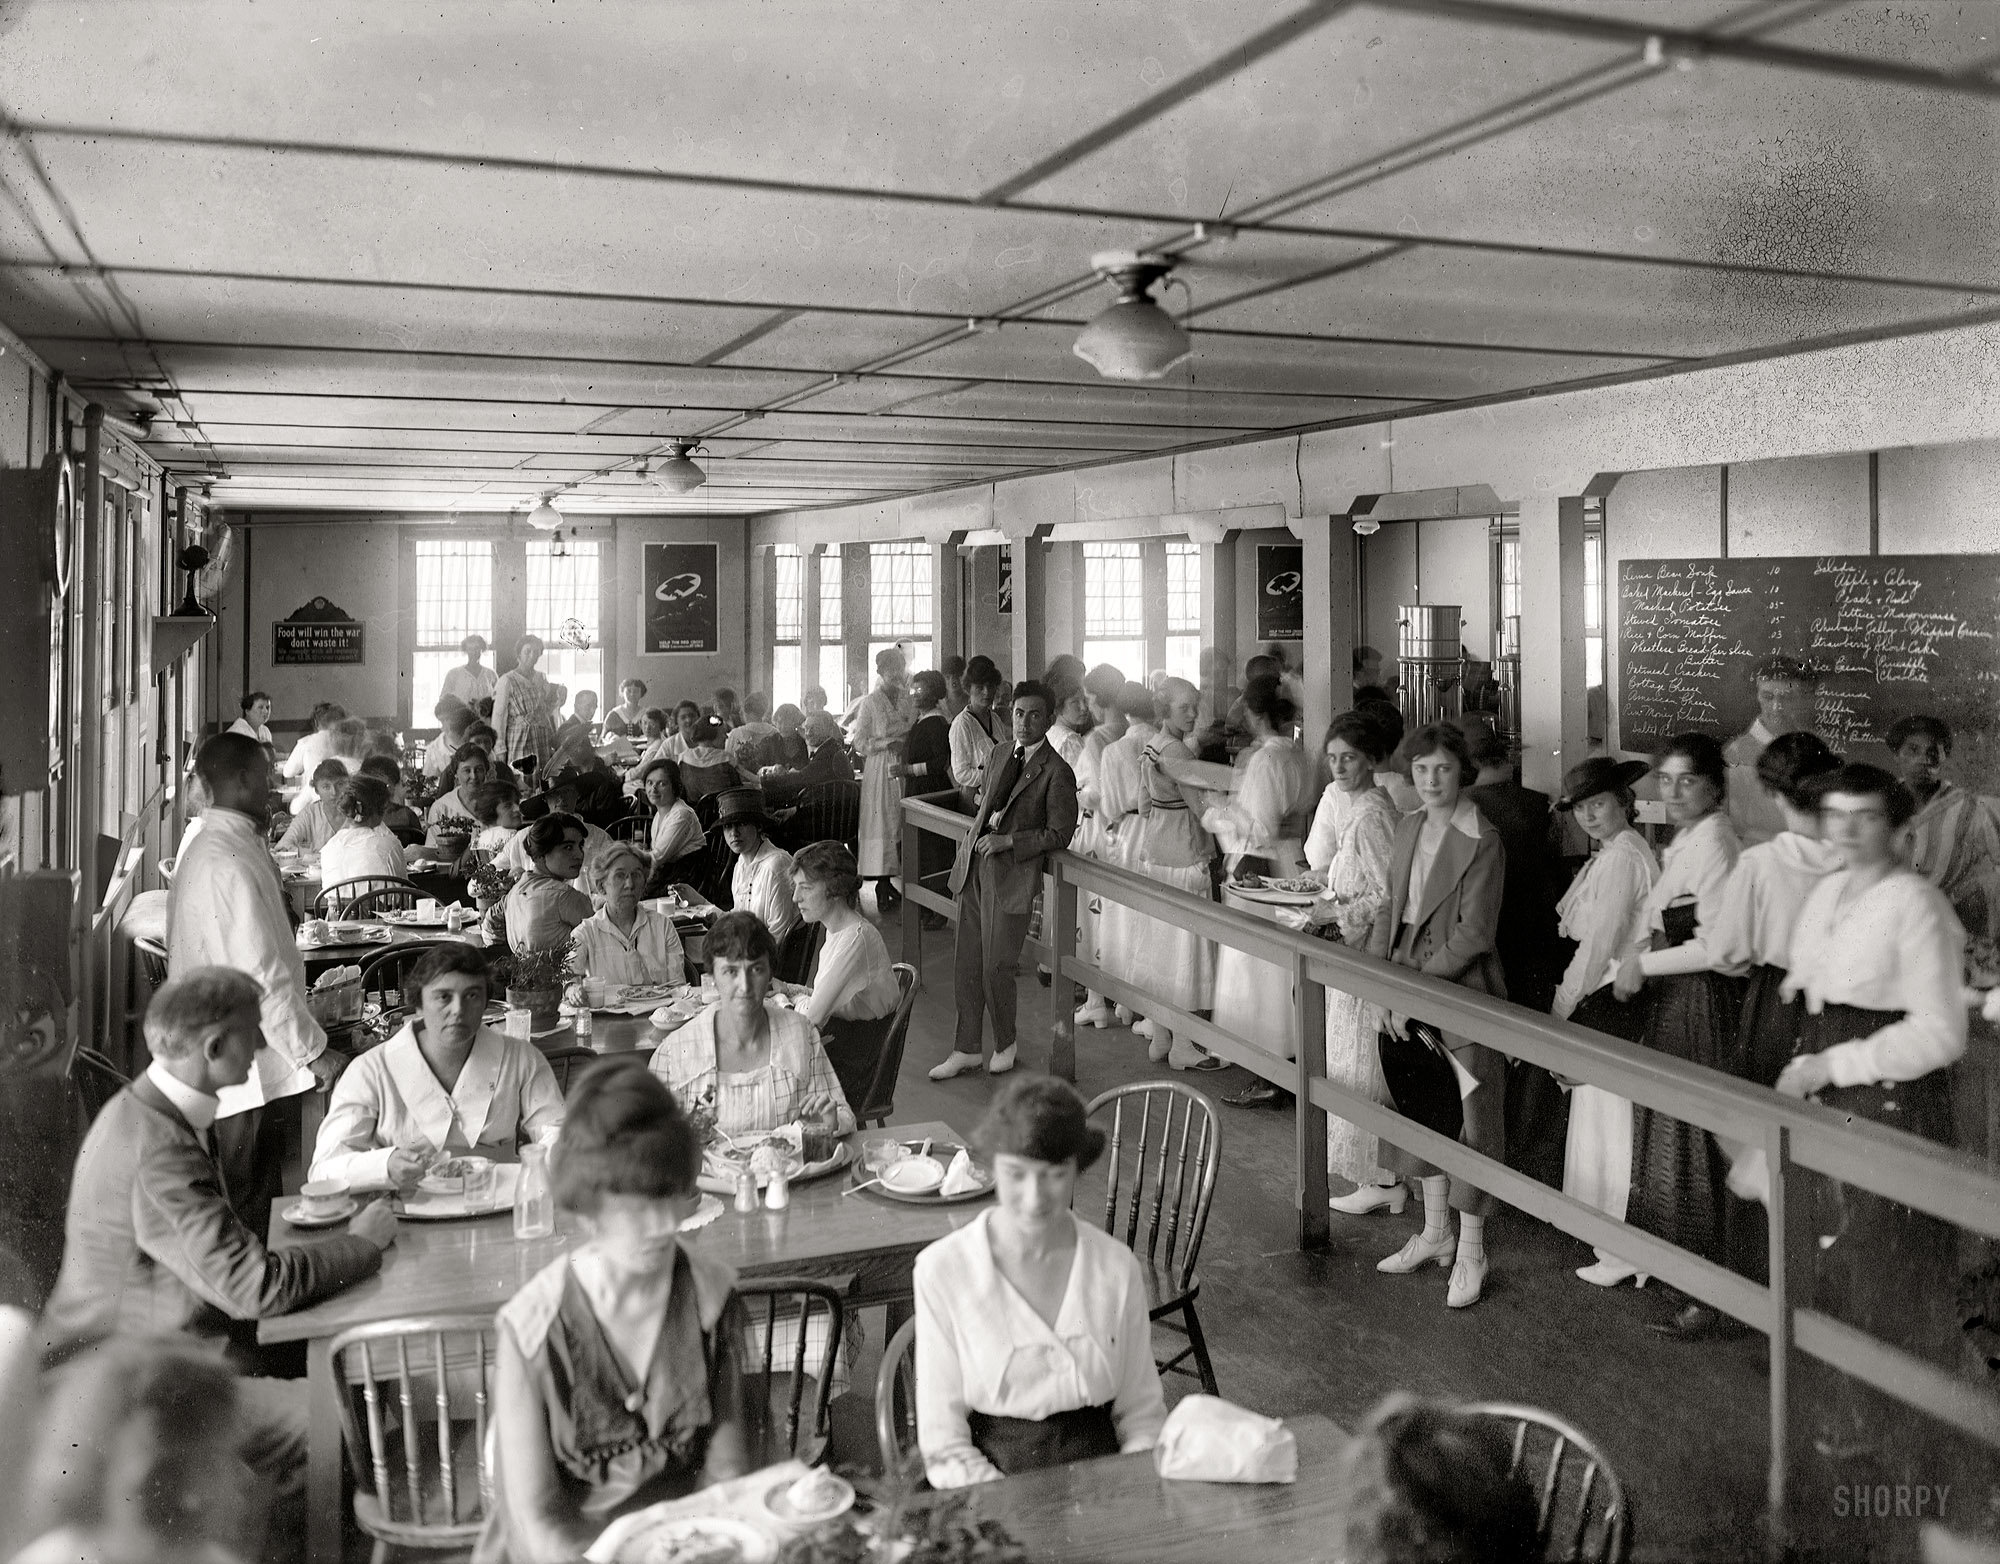 Washington circa 1918. "Food Administration cafeteria." The lima bean soup looks delicious. National Photo Co. Collection glass negative. View full size.